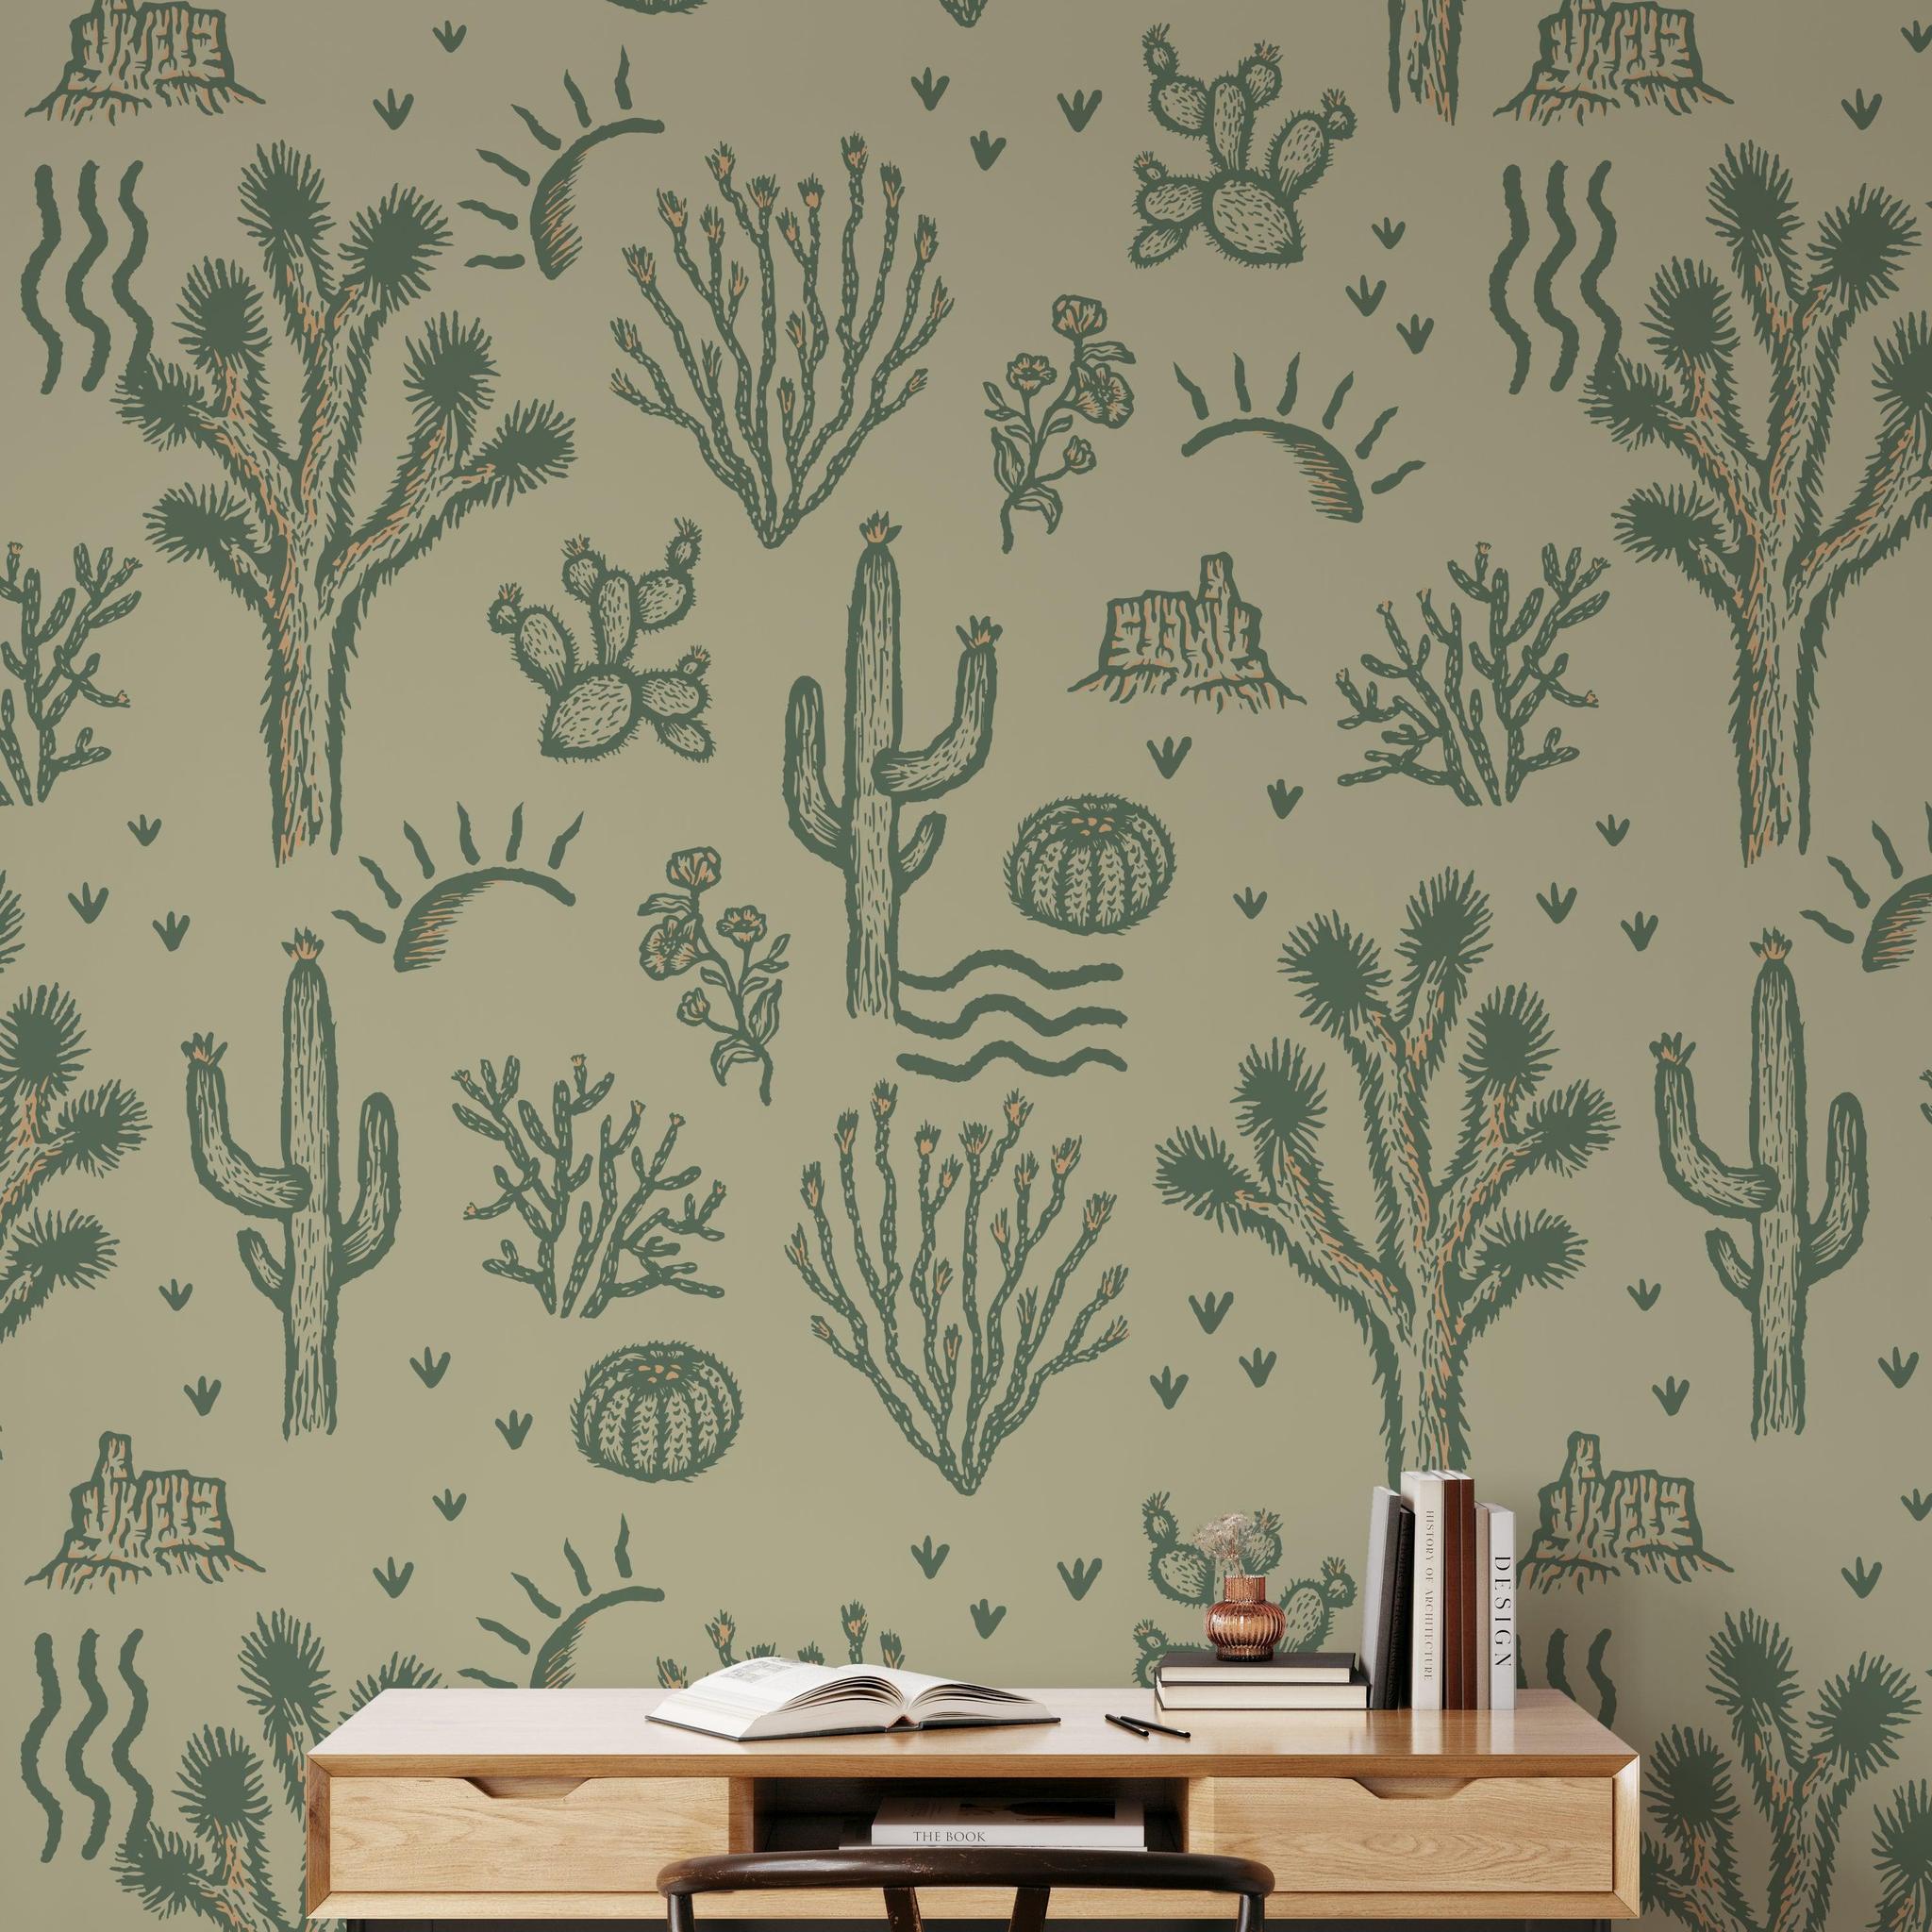 The Rayco Line's Desert Dreamer (Green) Wallpaper in a stylish home office setting, highlighting the unique design.
